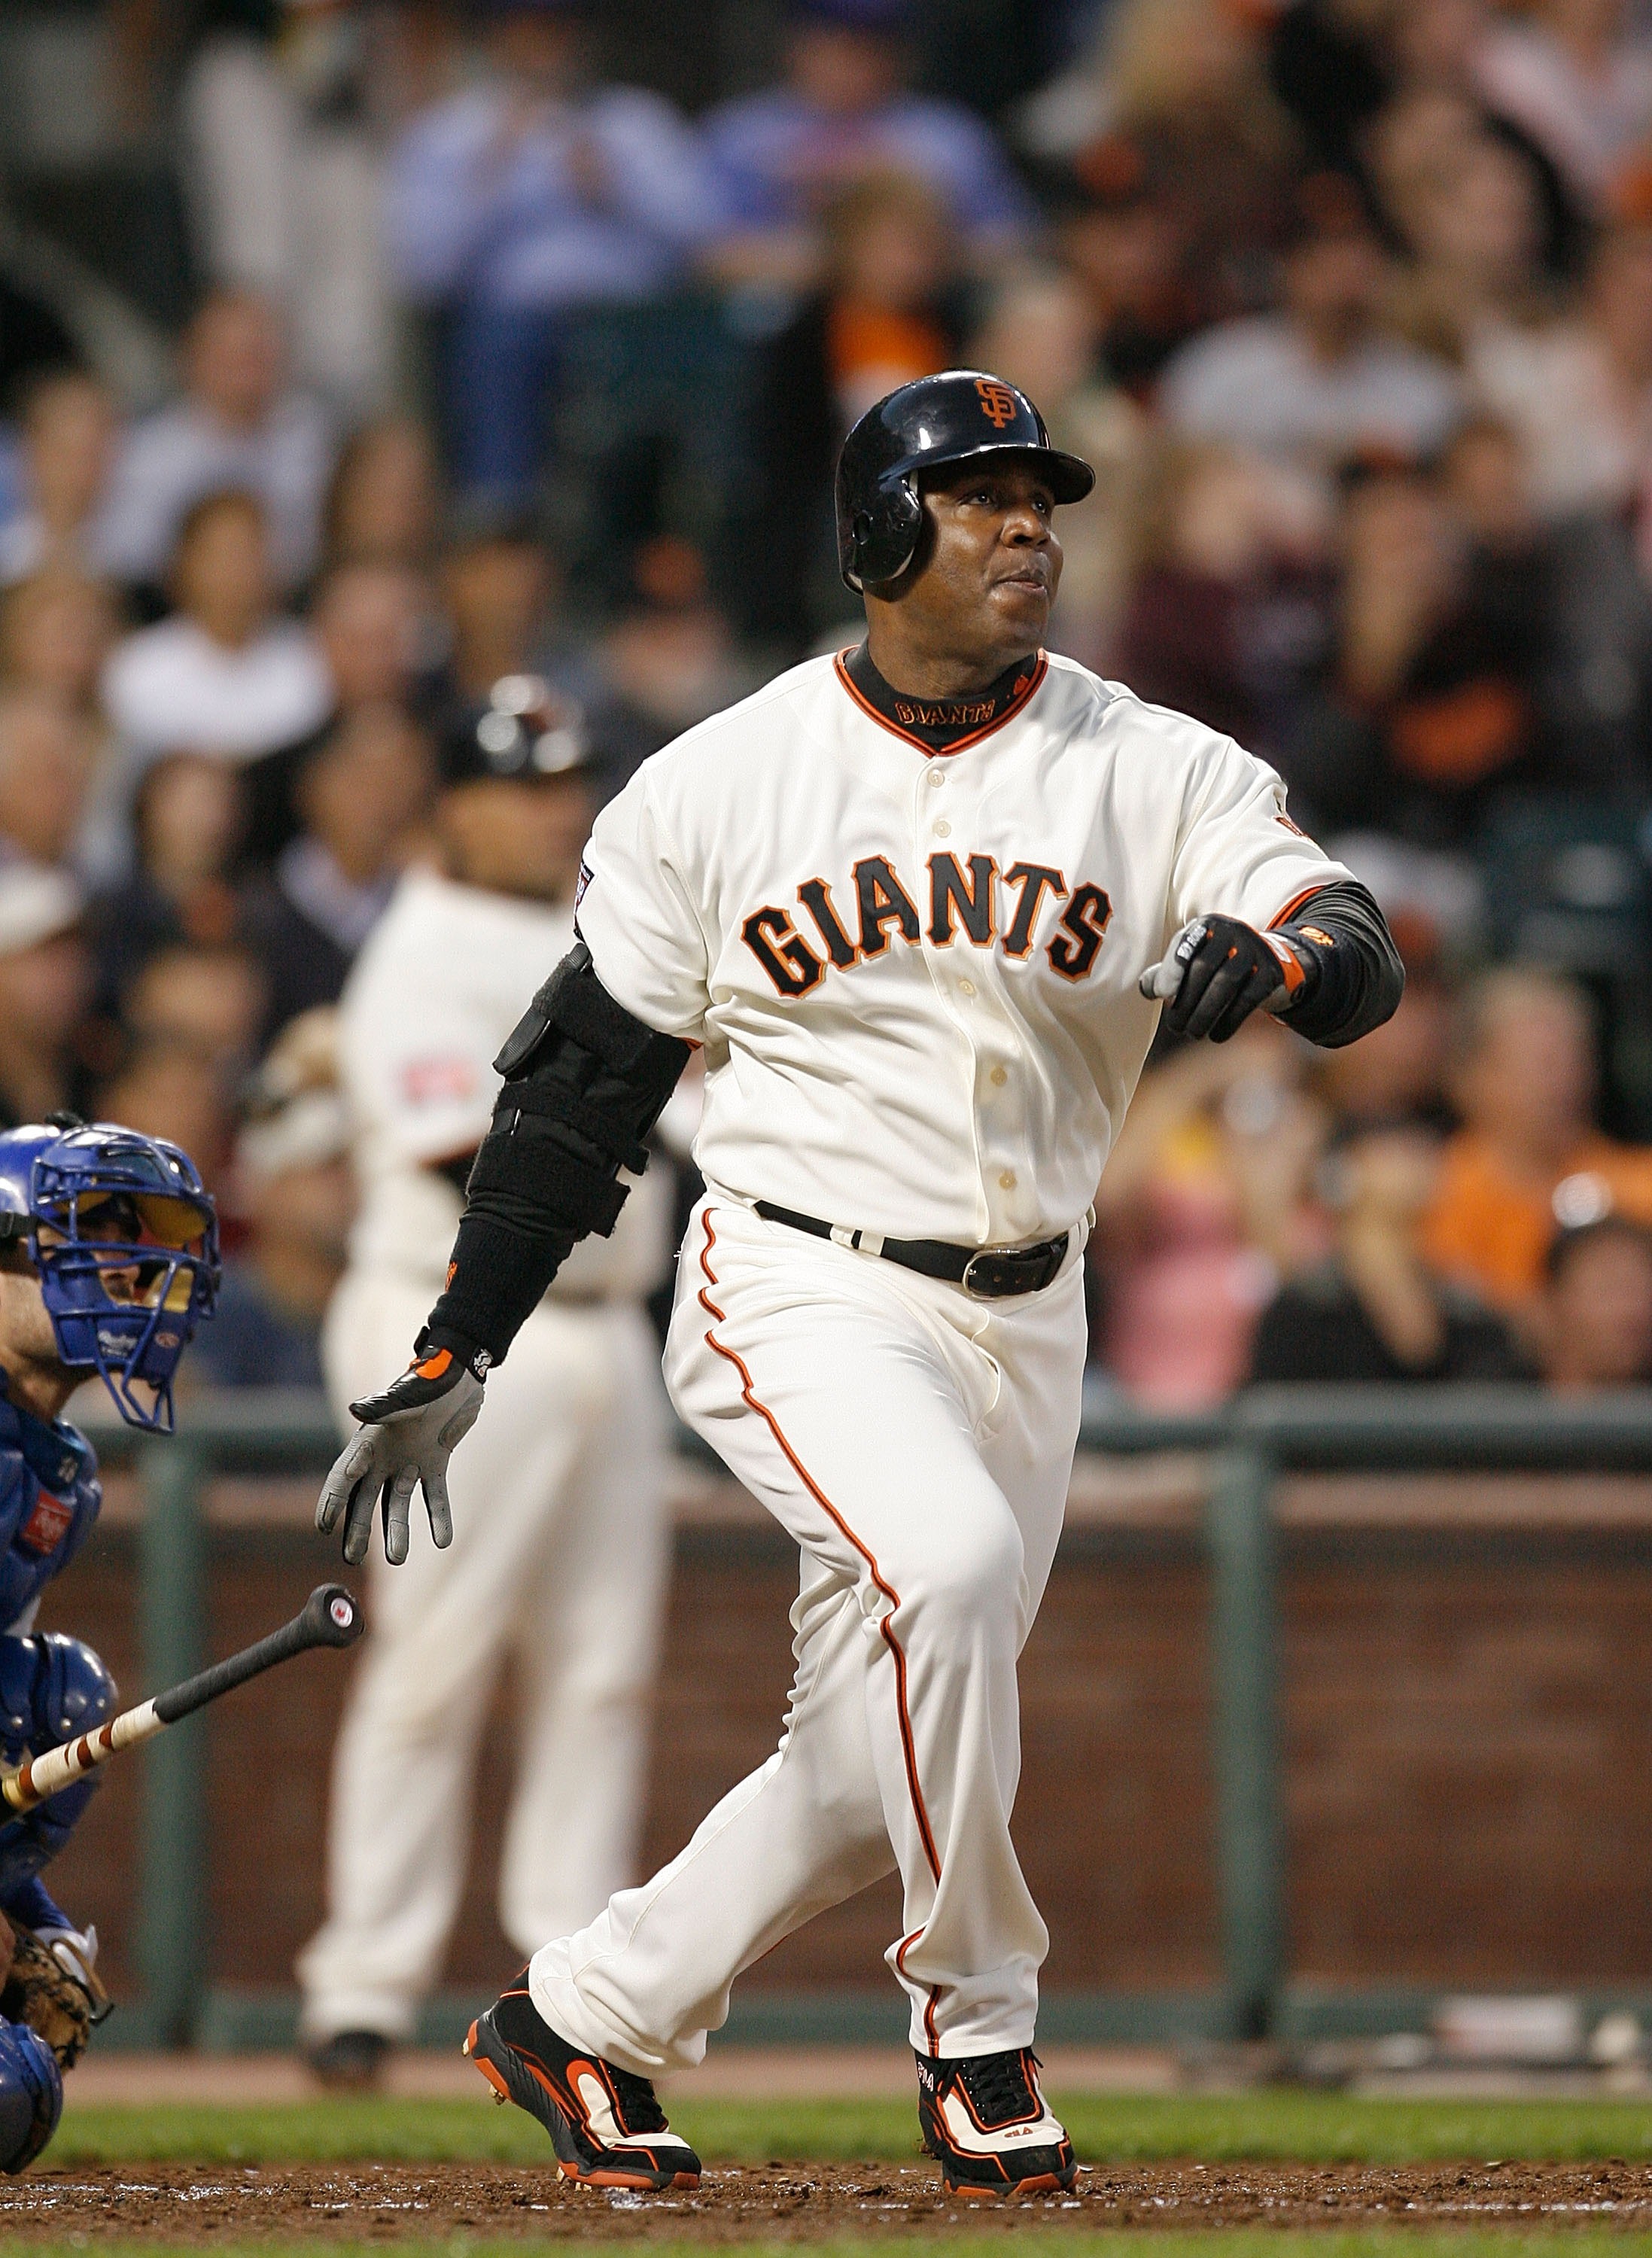 SAN FRANCISCO - AUGUST 22:  Outfielder Barry Bonds #25 of the San Francisco Giants watches his ball hit off the right field wall for a double during a Major League Baseball game against the Chicago Cubs on August 22, 2007 at AT&T Park in San Francisco, Ca